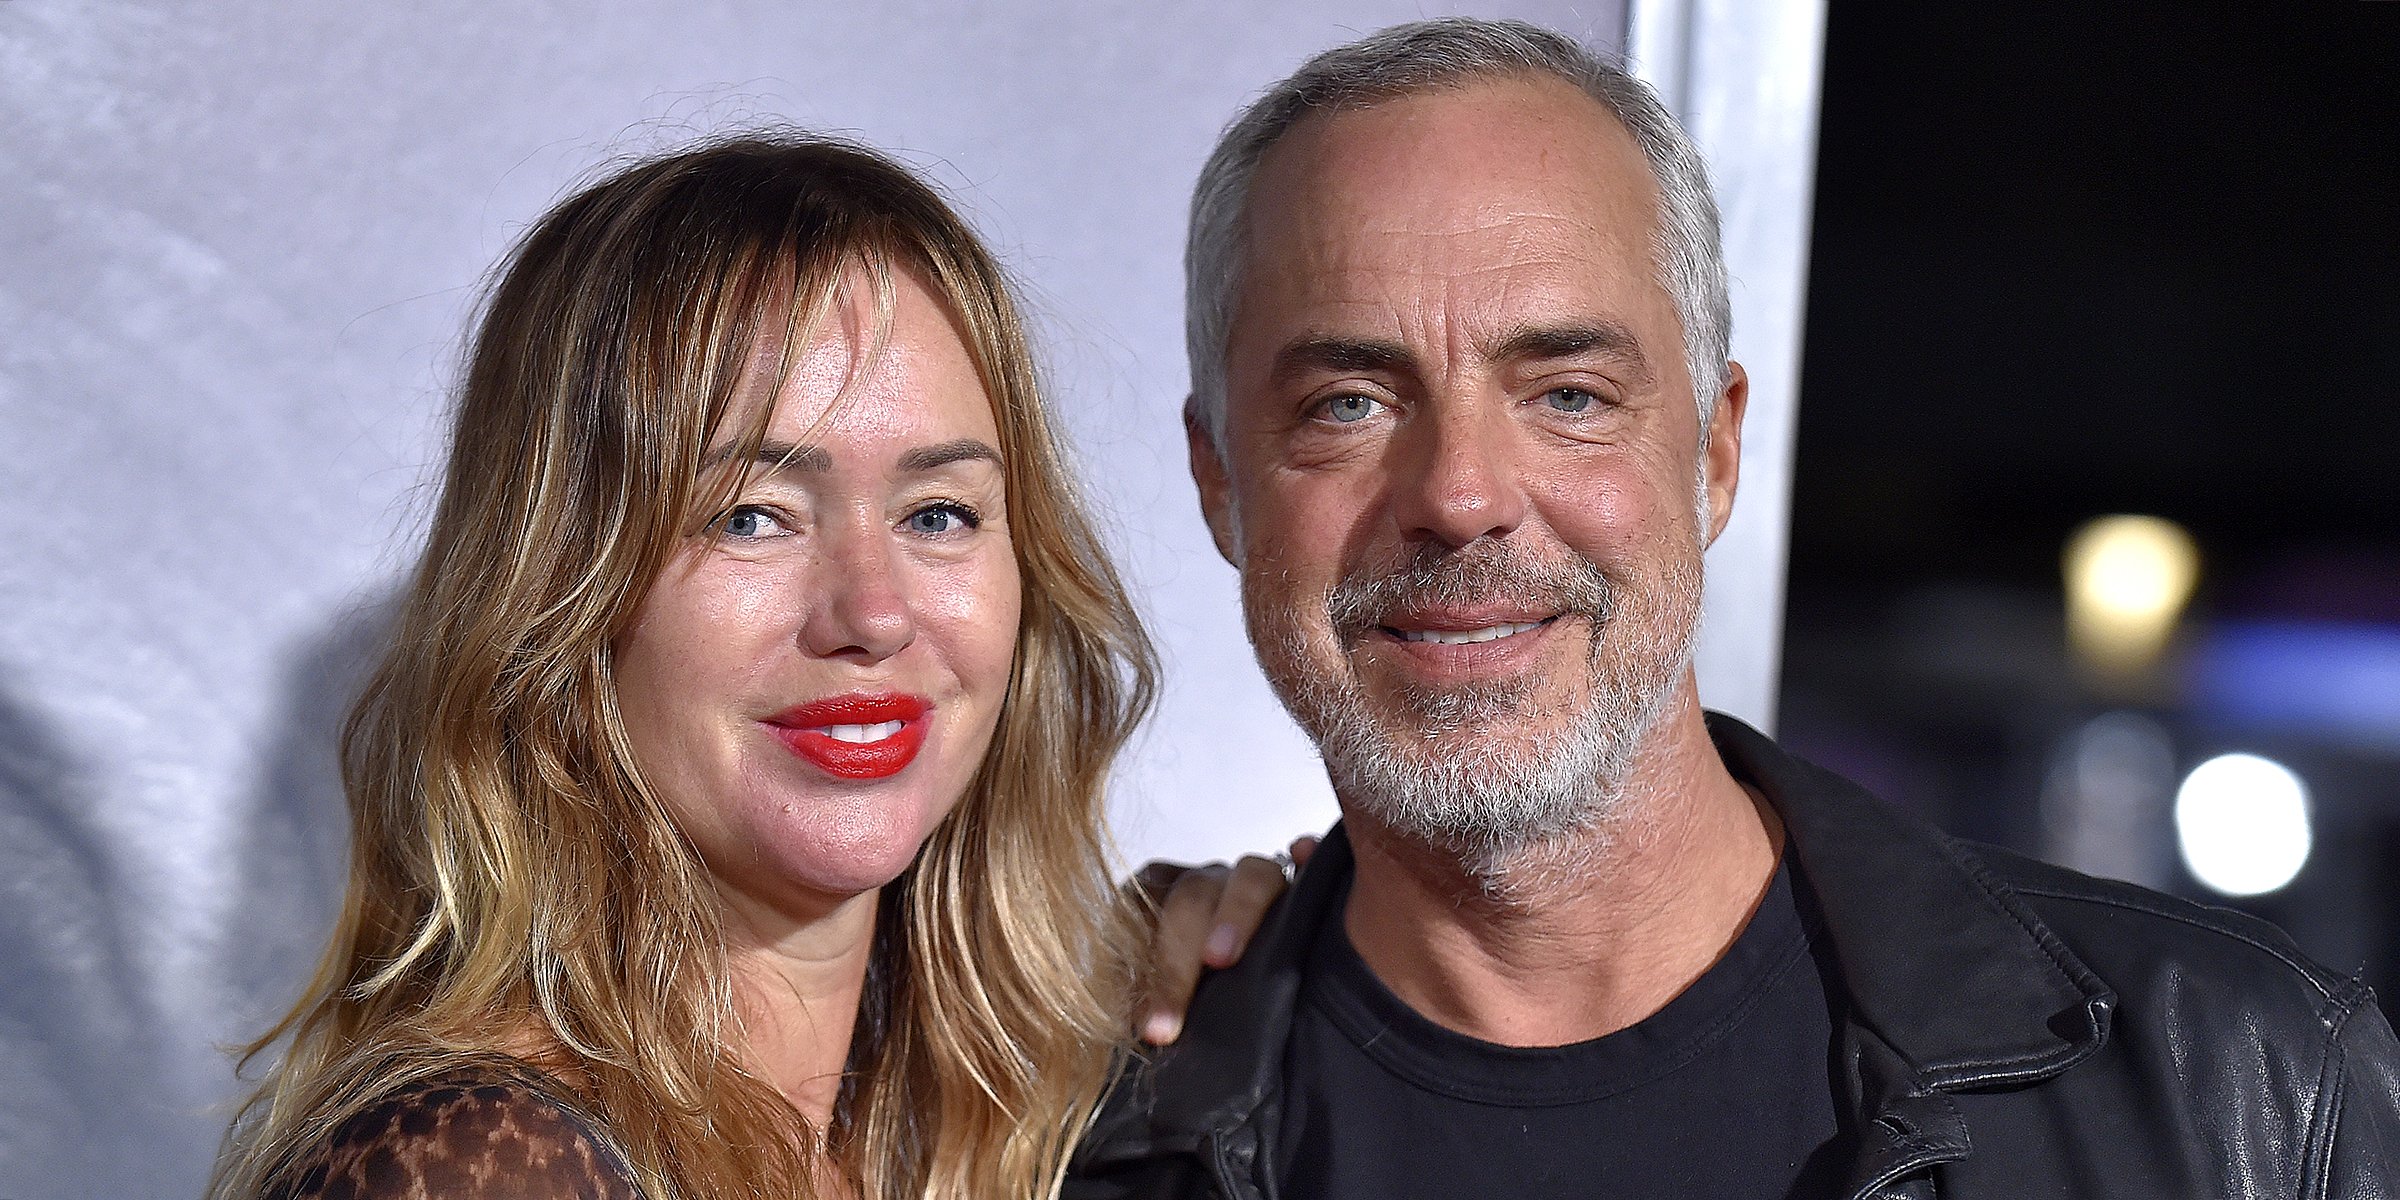 Jose Stemkens and Titus Welliver. | Source: Getty Images